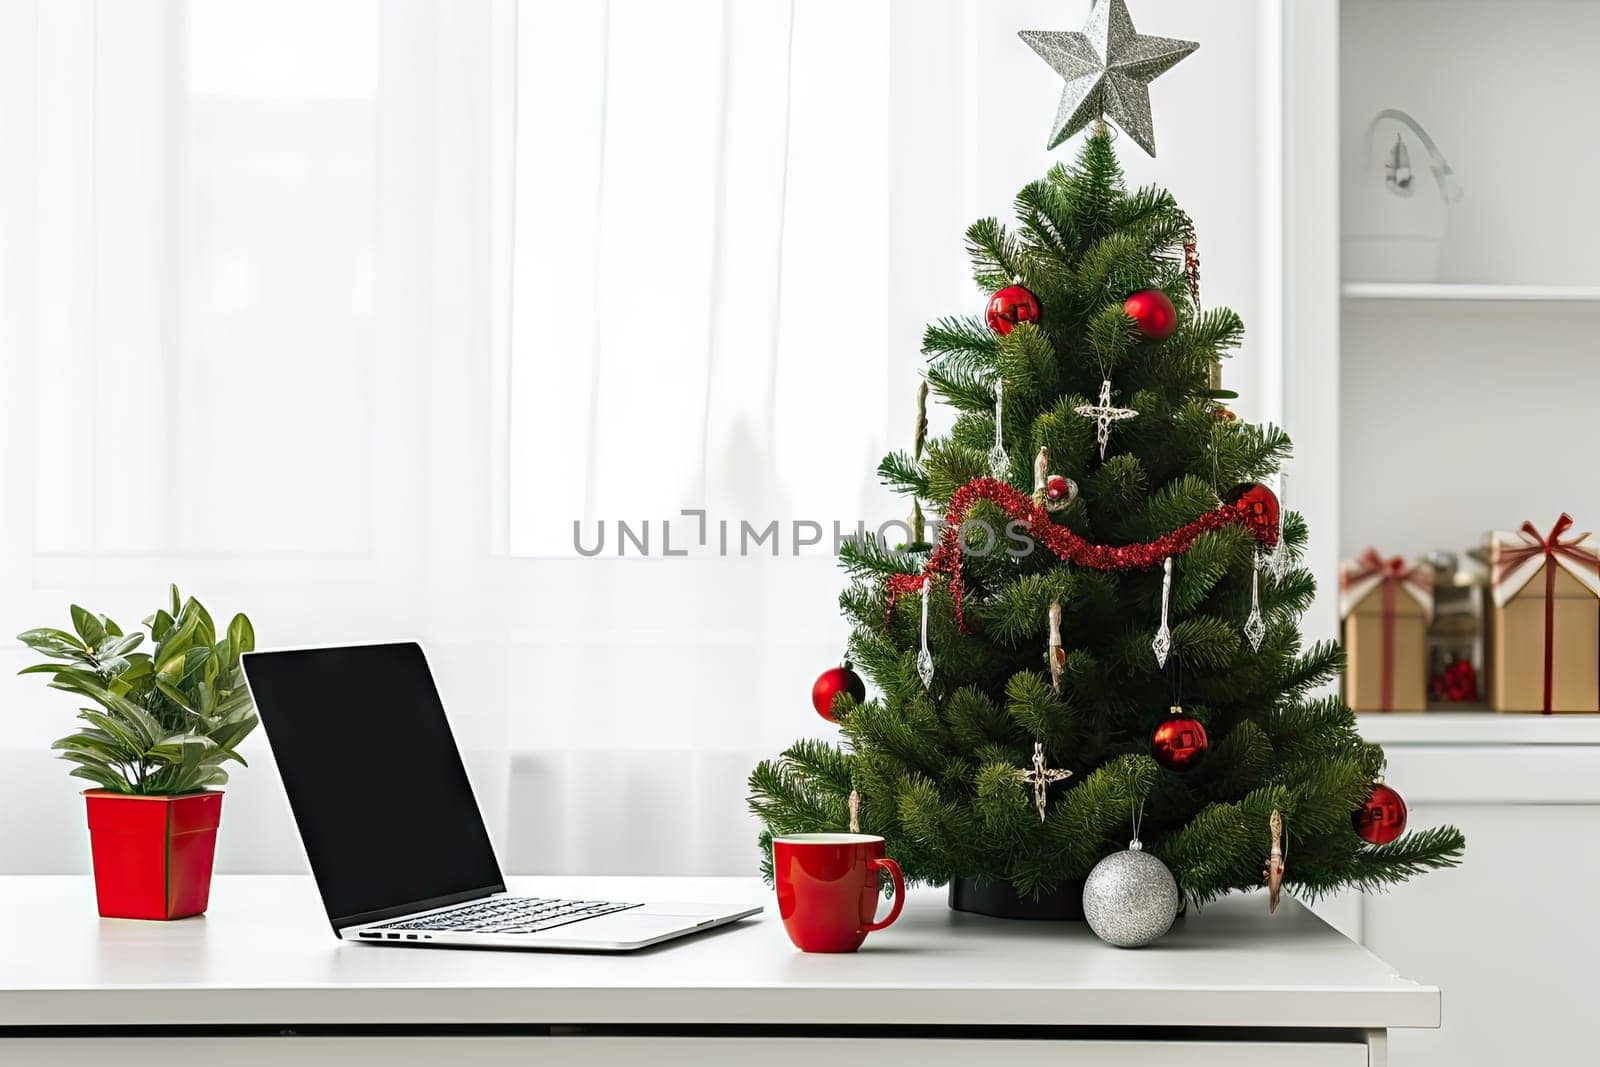 a christmas tree on a desk with a laptop and other office supplies in the fore - image is taken from above